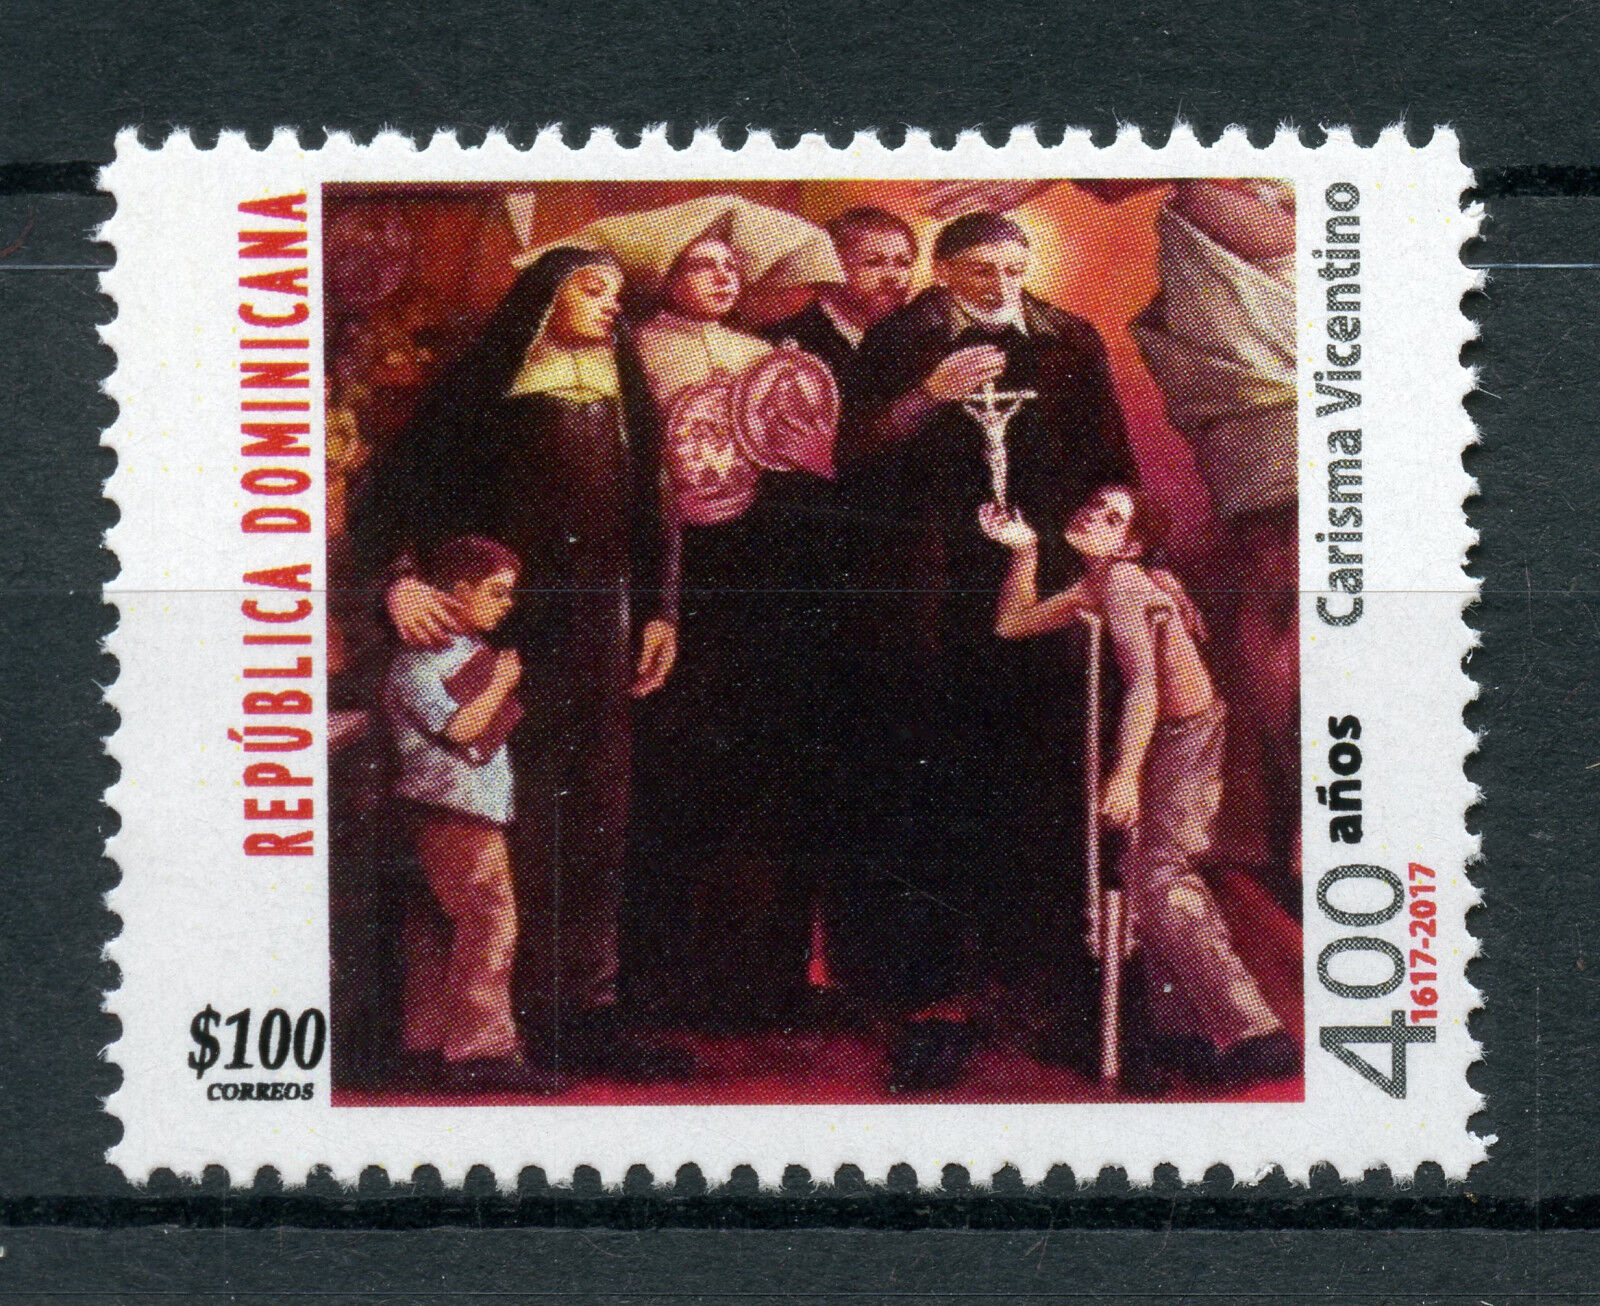 Dominican Rep 2017 MNH Vincentian Charism 1v 400 Rel Max 68% OFF Set Art Yrs Spring new work